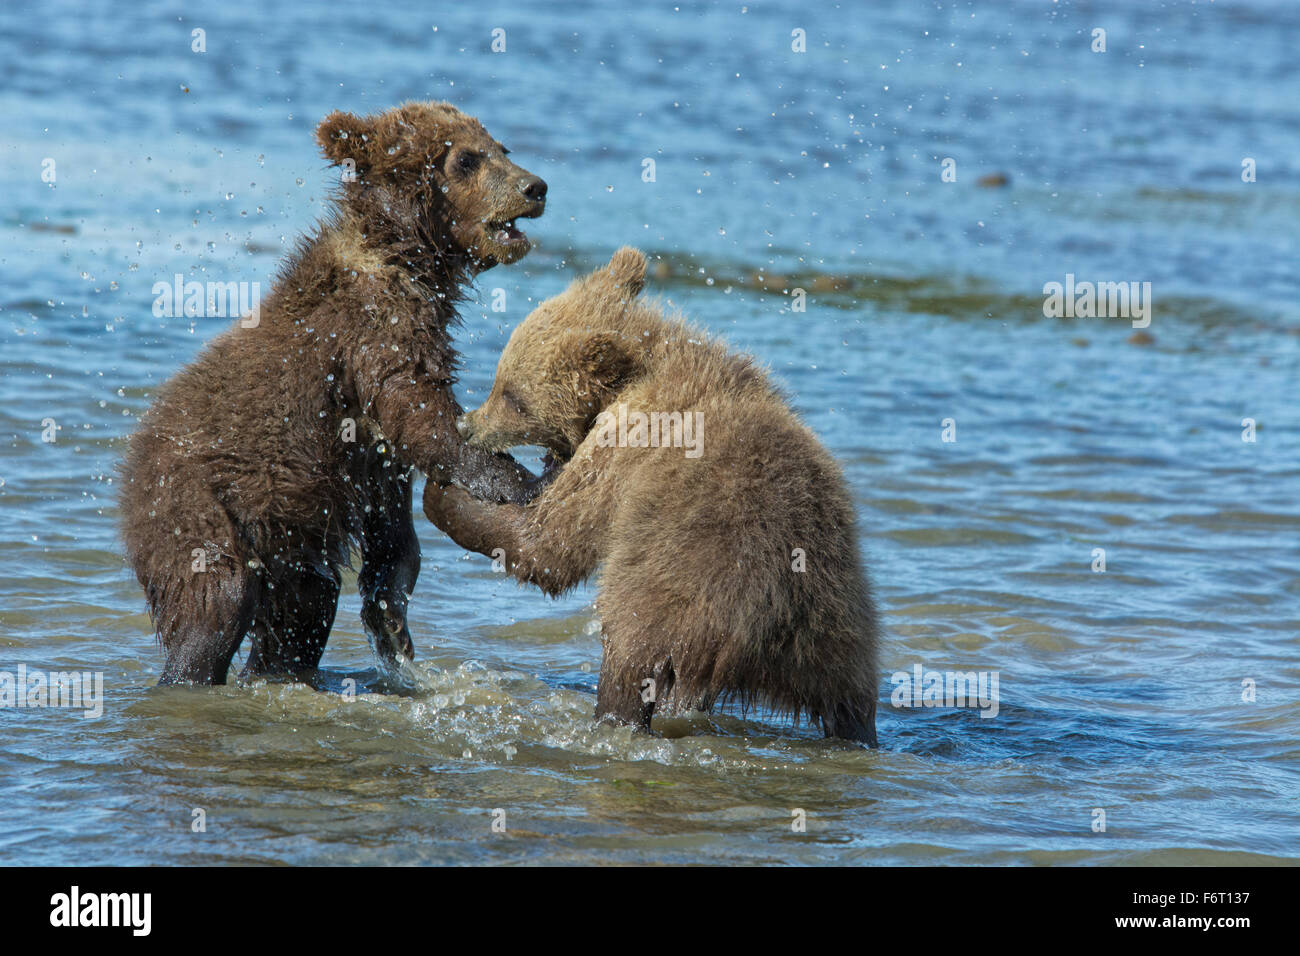 Two Grizzly Bear Spring Cubs, Ursus arctos, playing in the water with one biting the paw of the other, Cook Inlet, Alaska, USA Stock Photo